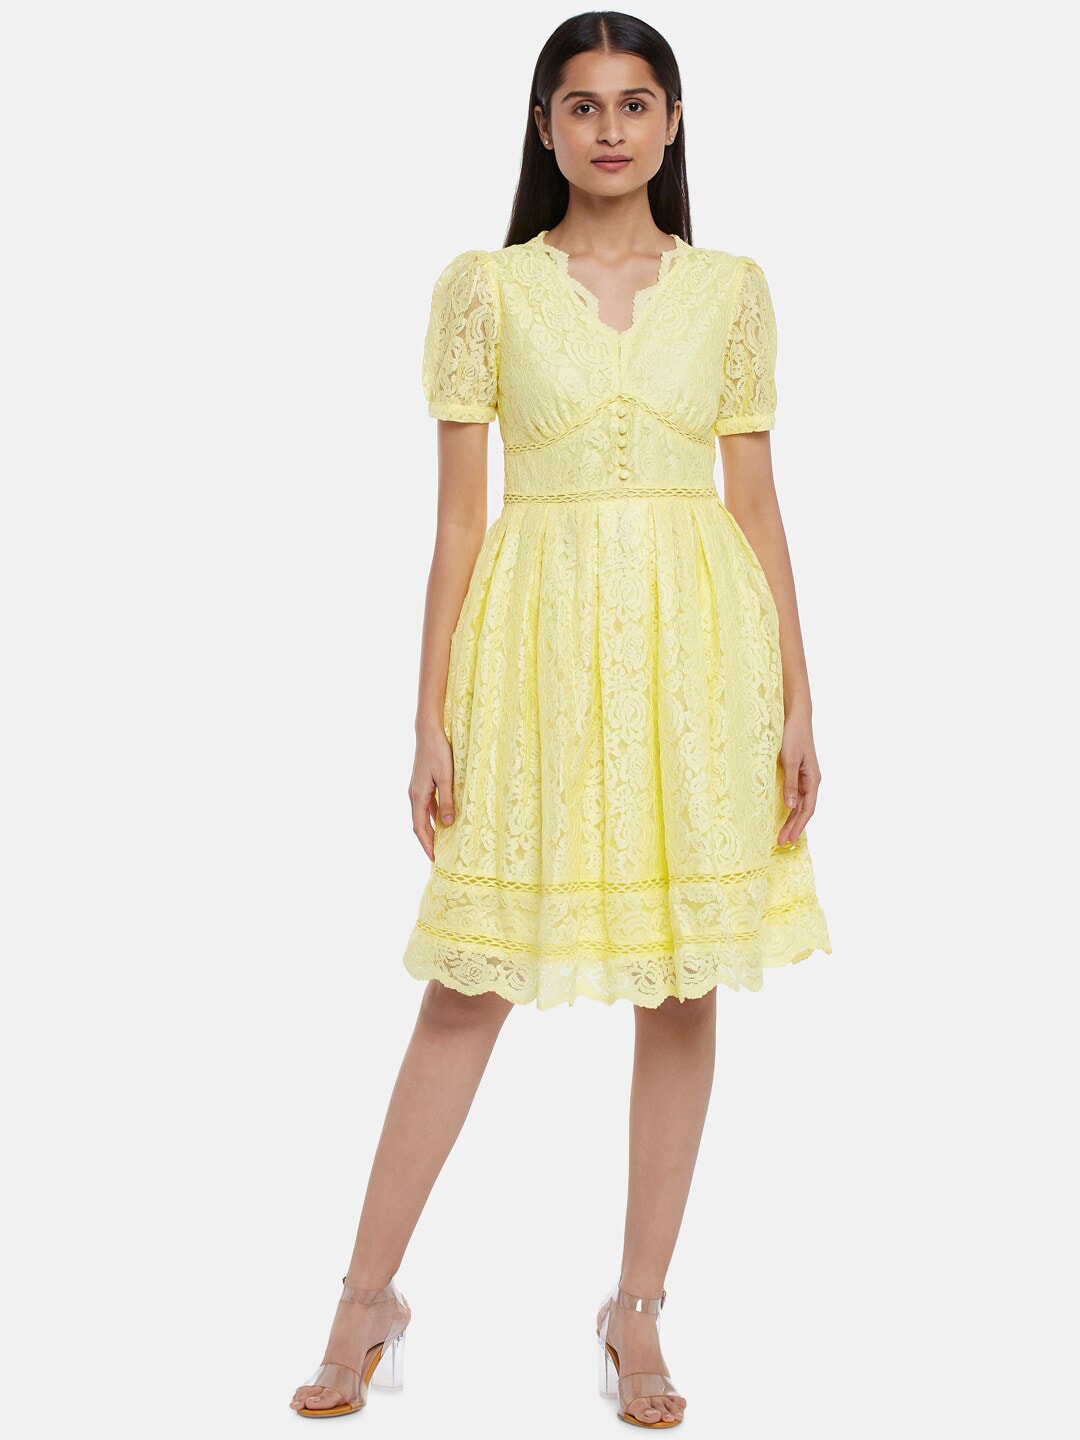 Honey by Pantaloons Yellow Lace Dress Price in India